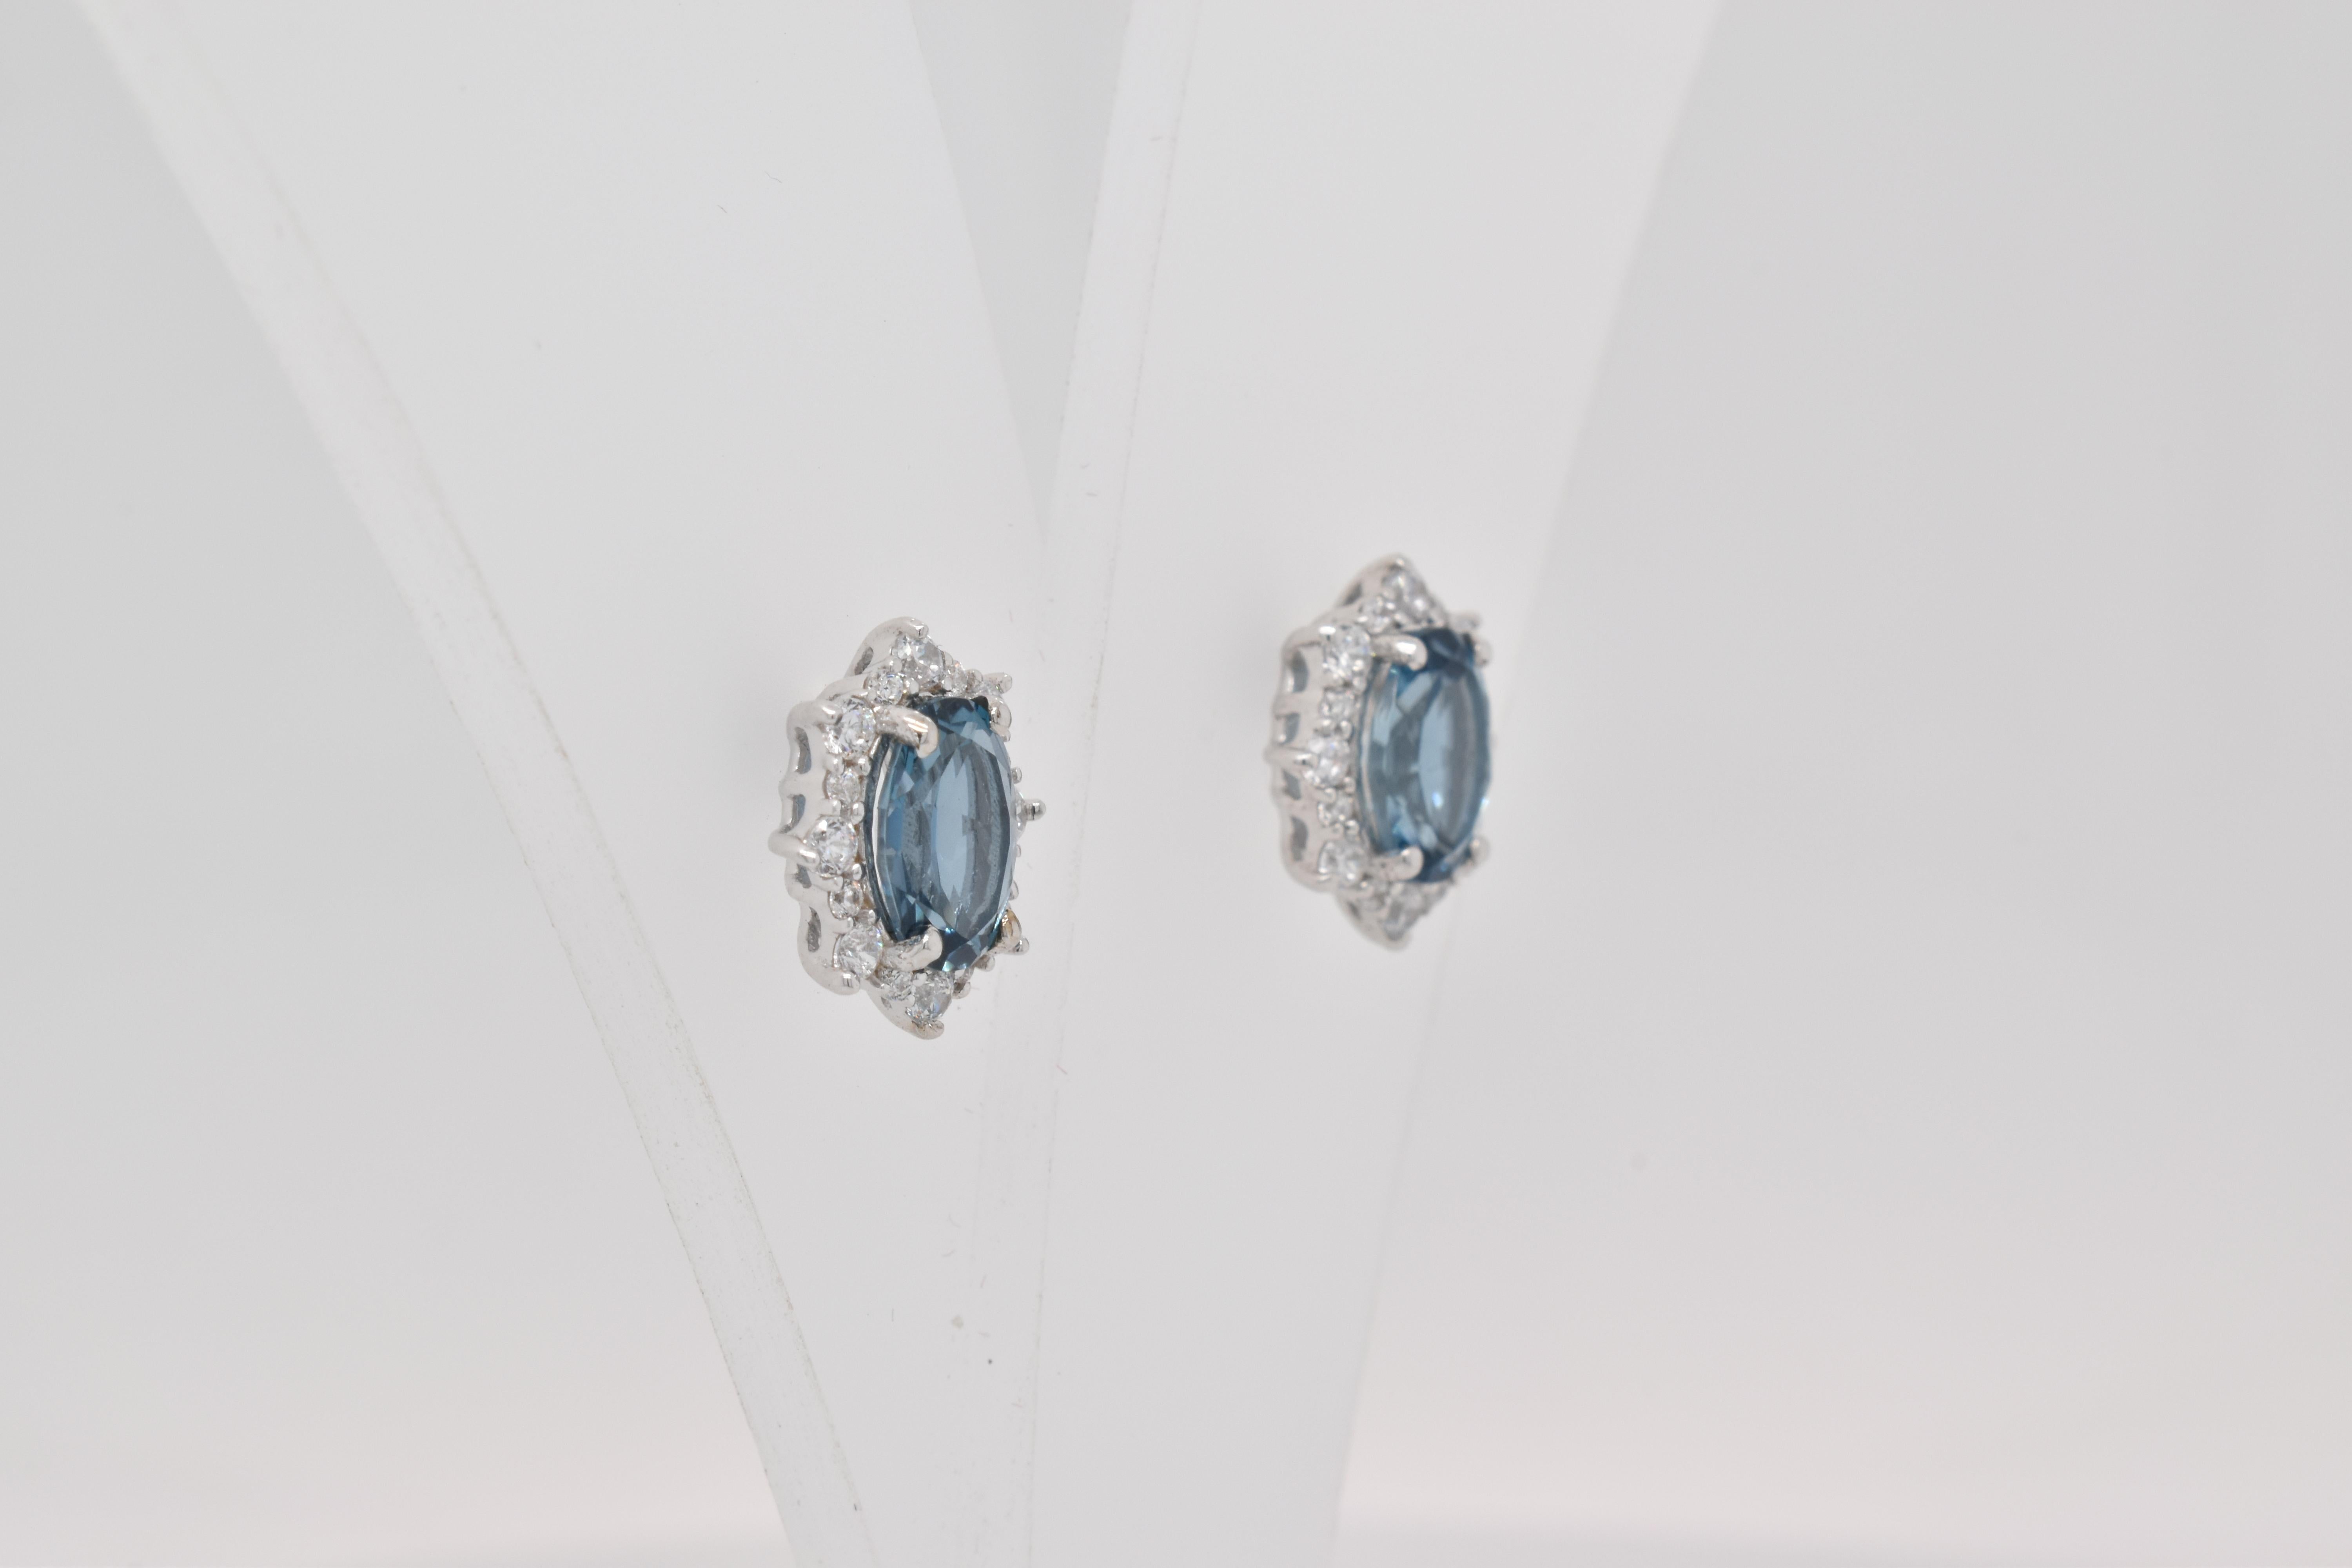 Oval Shape London Blue Topaz beautifully surrounded with CZ crafted in a Earrings. A fiery Blue color December Birthstone. For a special occasion like Engagement or Proposal or may be as a gift for a special person.

Primary Stone Size - 7x5mm